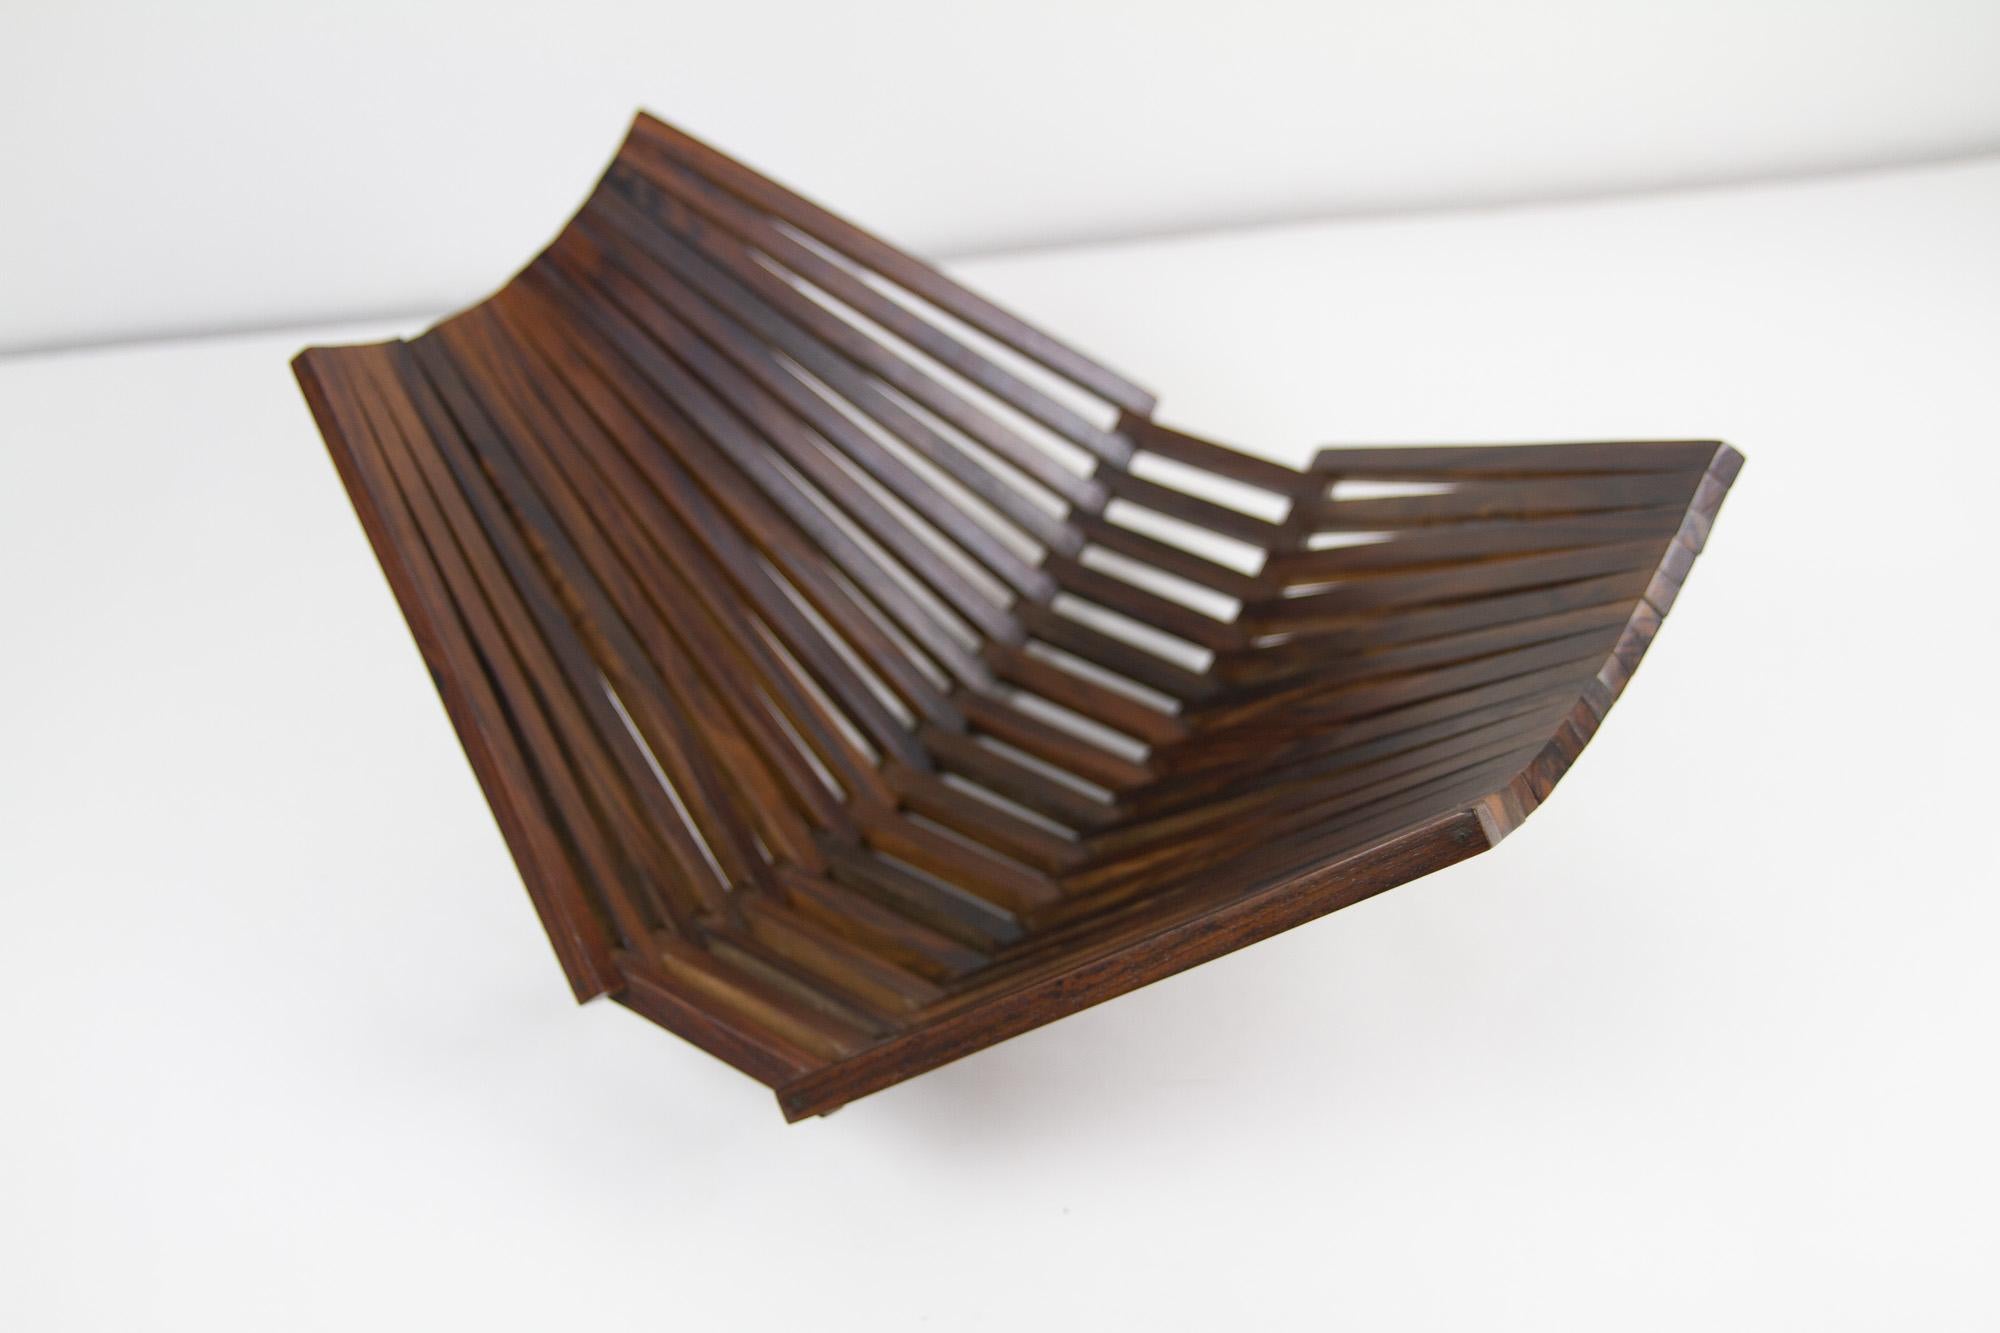 Danish Mid-Century Modern Rosewood Basket, 1960s.
Vintage Danish foldable fruit basket in solid Palisander. Made in Denmark in the 1960s. This flexible Rosewood bowl can be used as a basket or as a decorative object. When folded out it measures 40